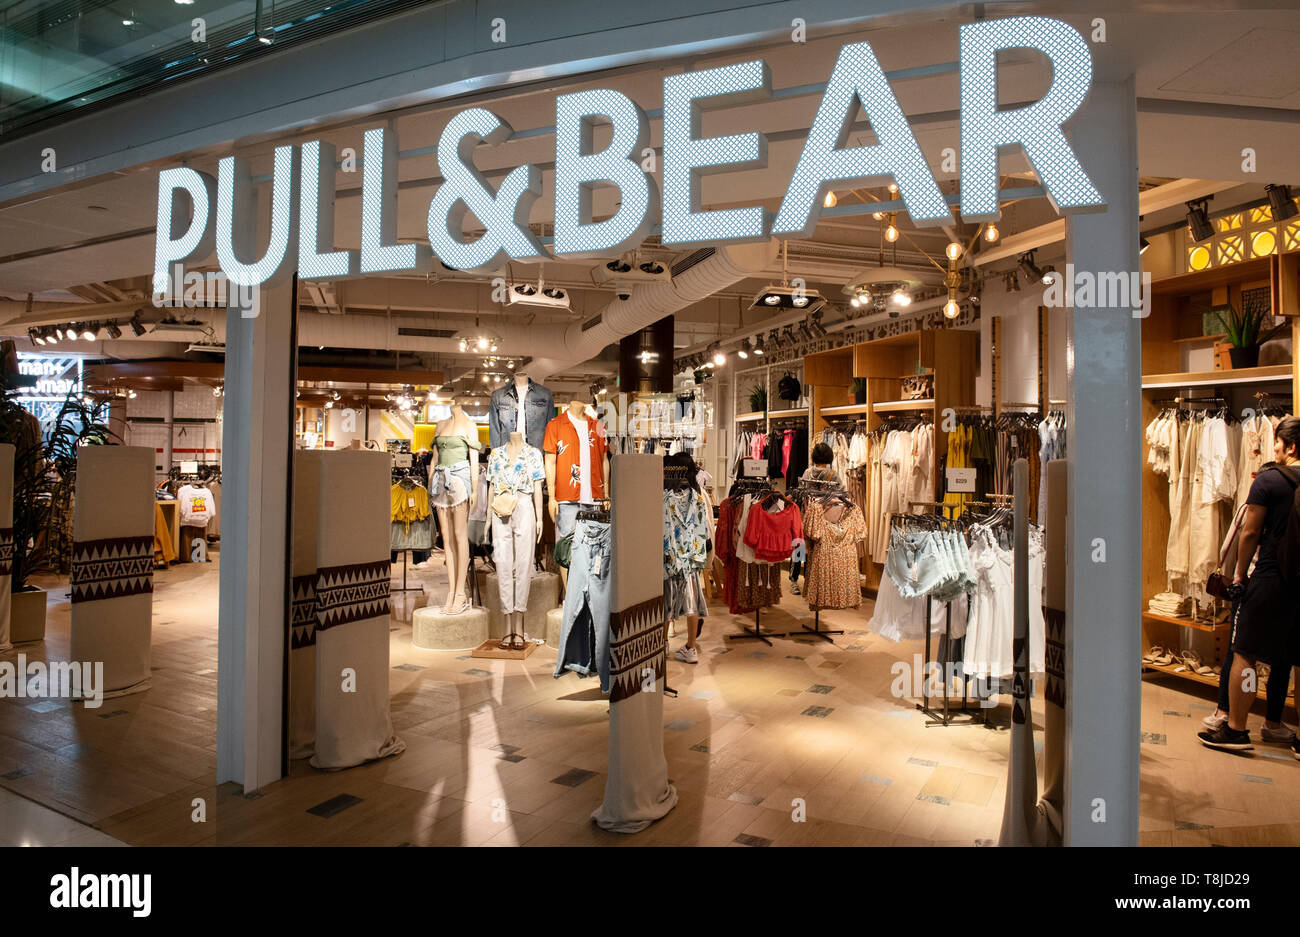 Pull bear hi-res stock photography and images - Alamy